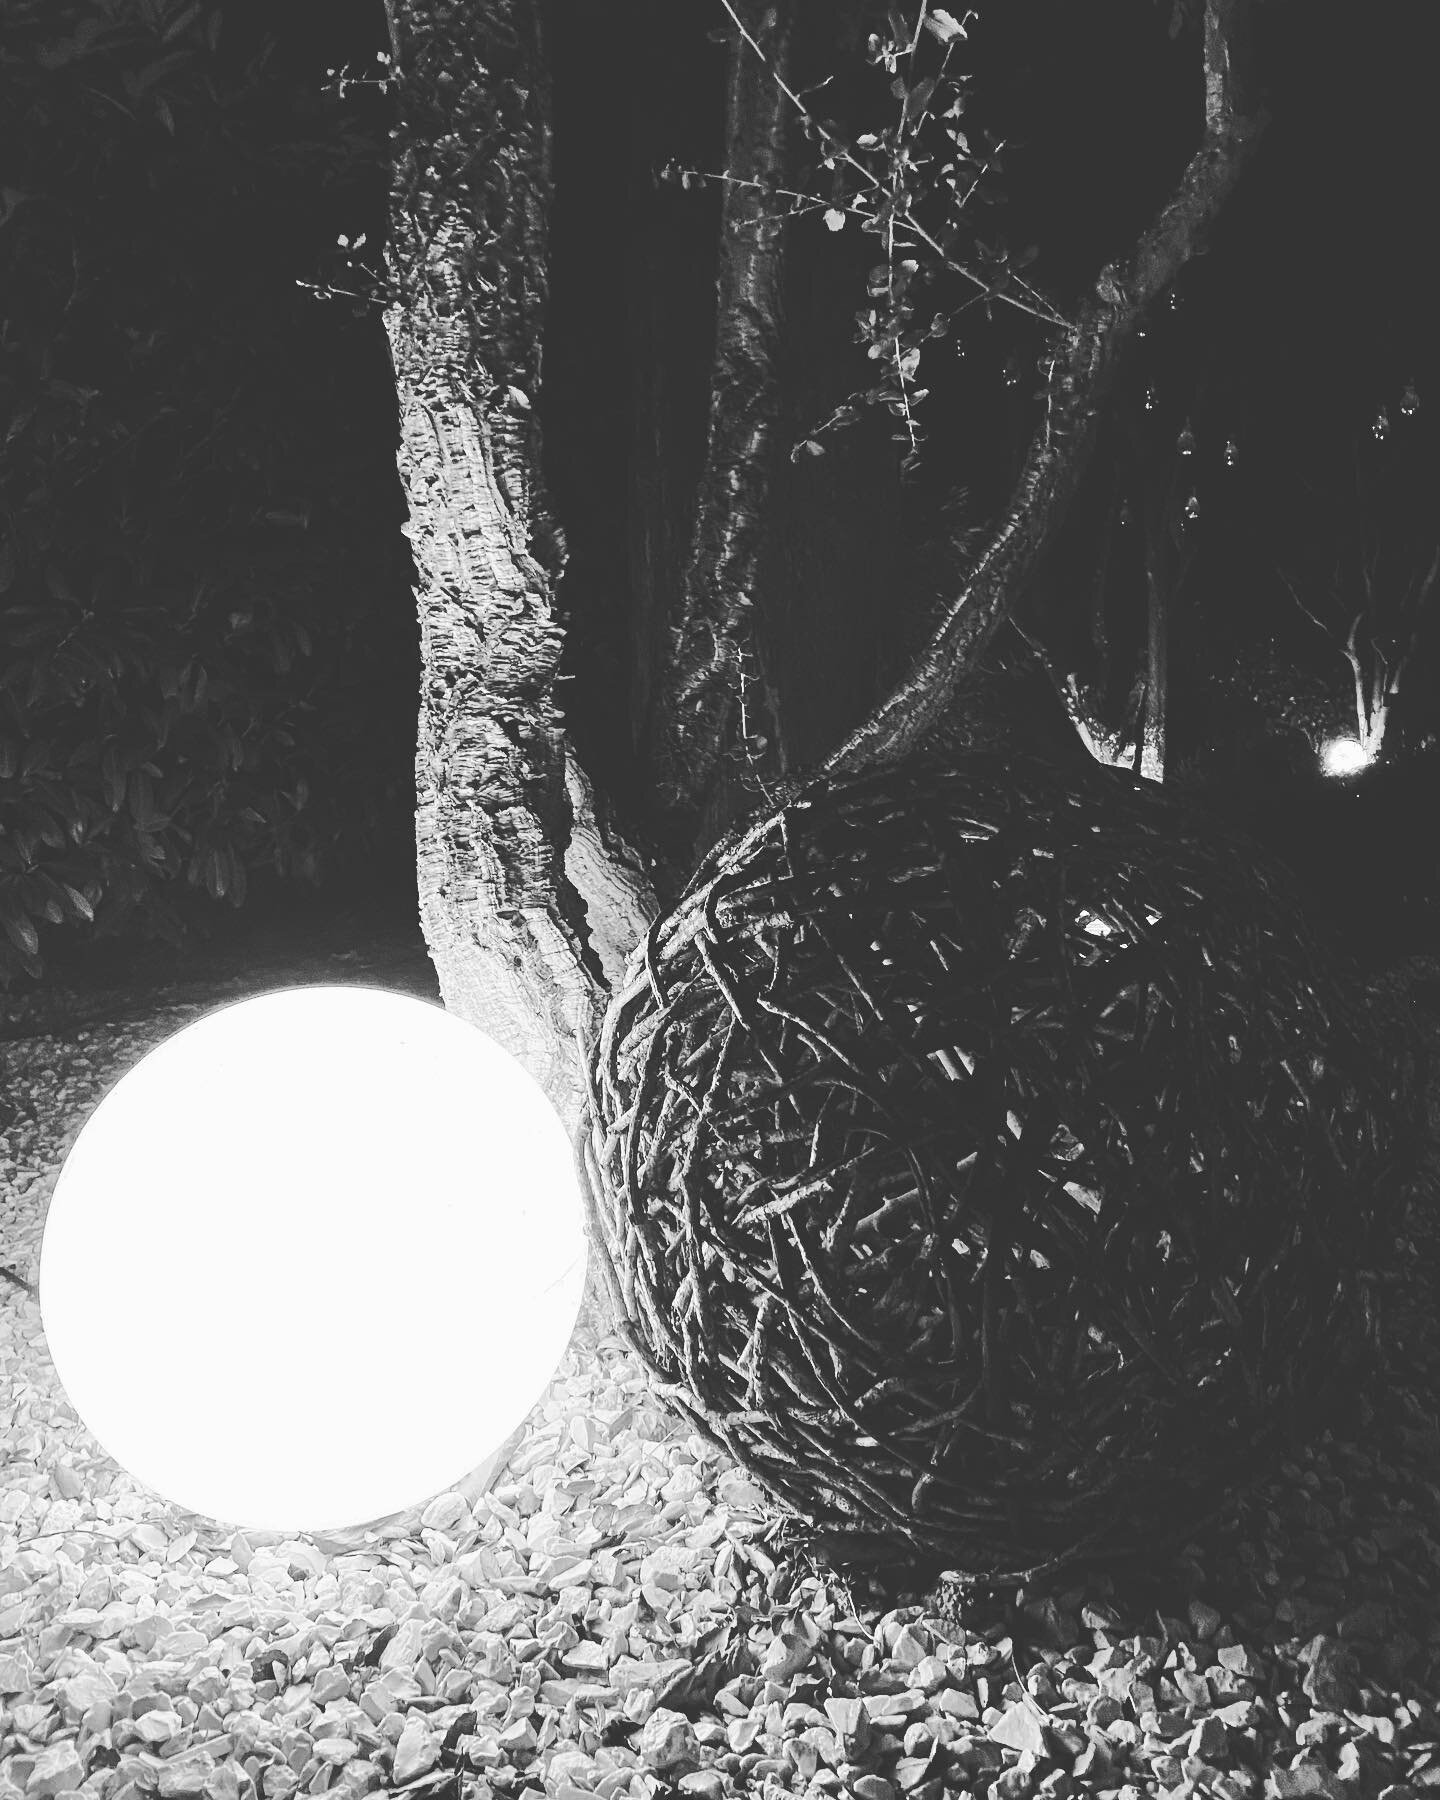 Merry christmas 🎅we are on holiday take care See you next year #christmas #holiday #newyearseve #garden #light #luzern